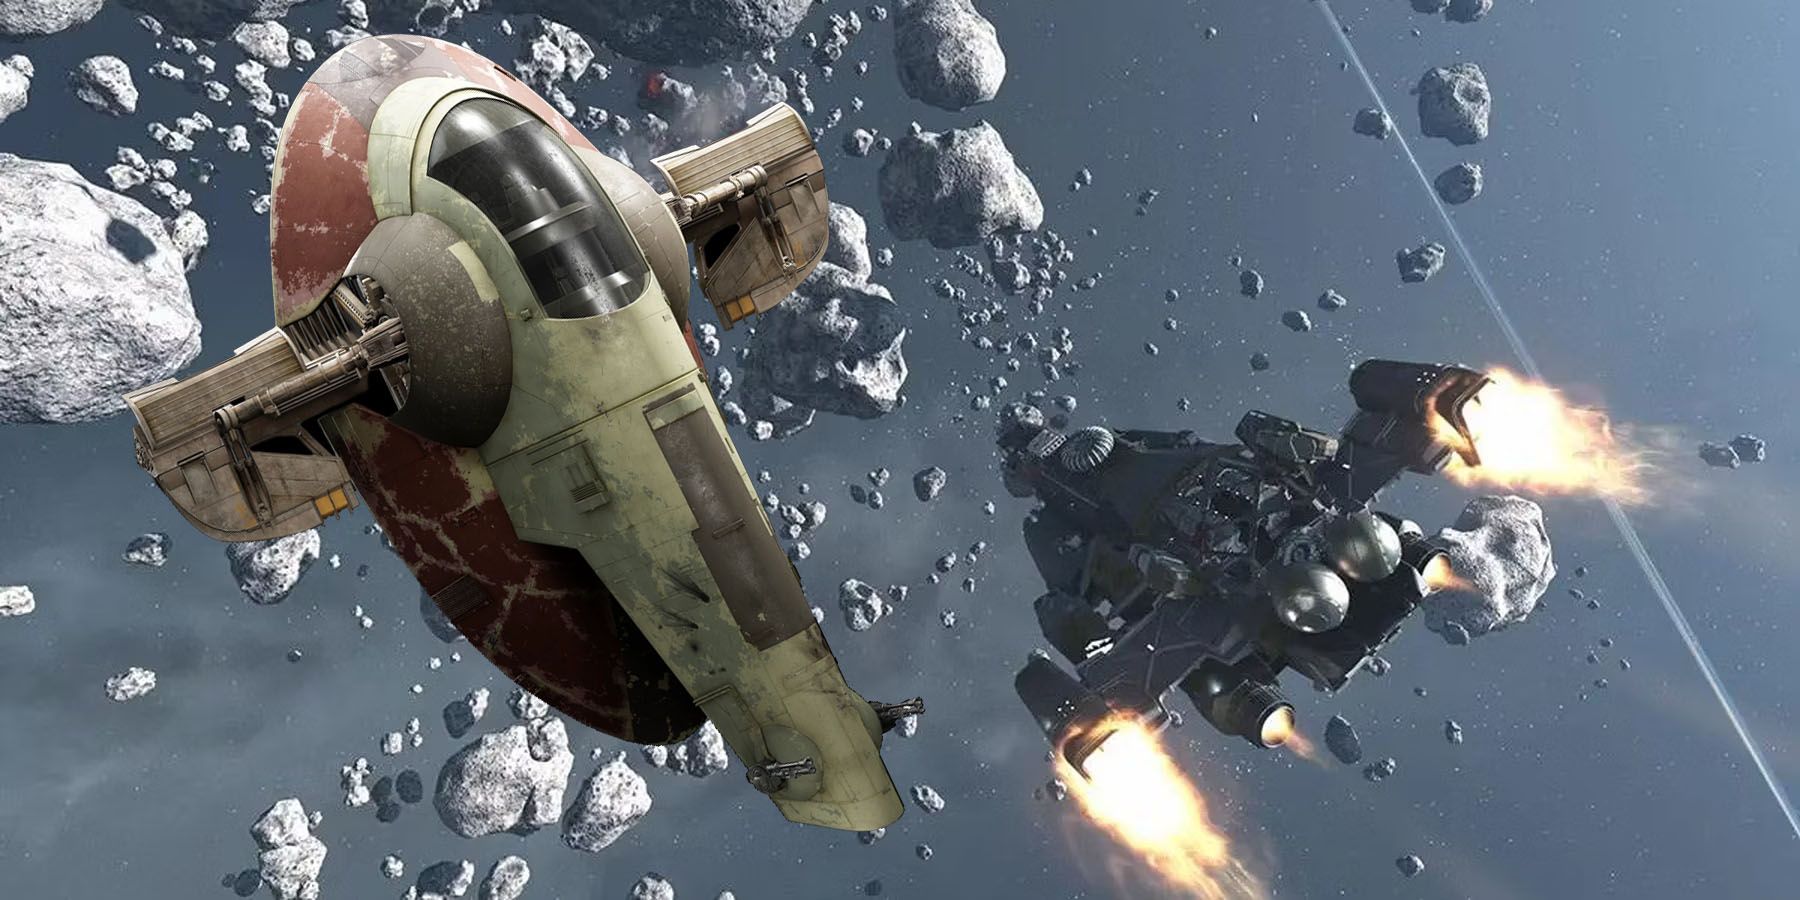 Starfield Player Builds Boba Fett's Ship From Star Wars